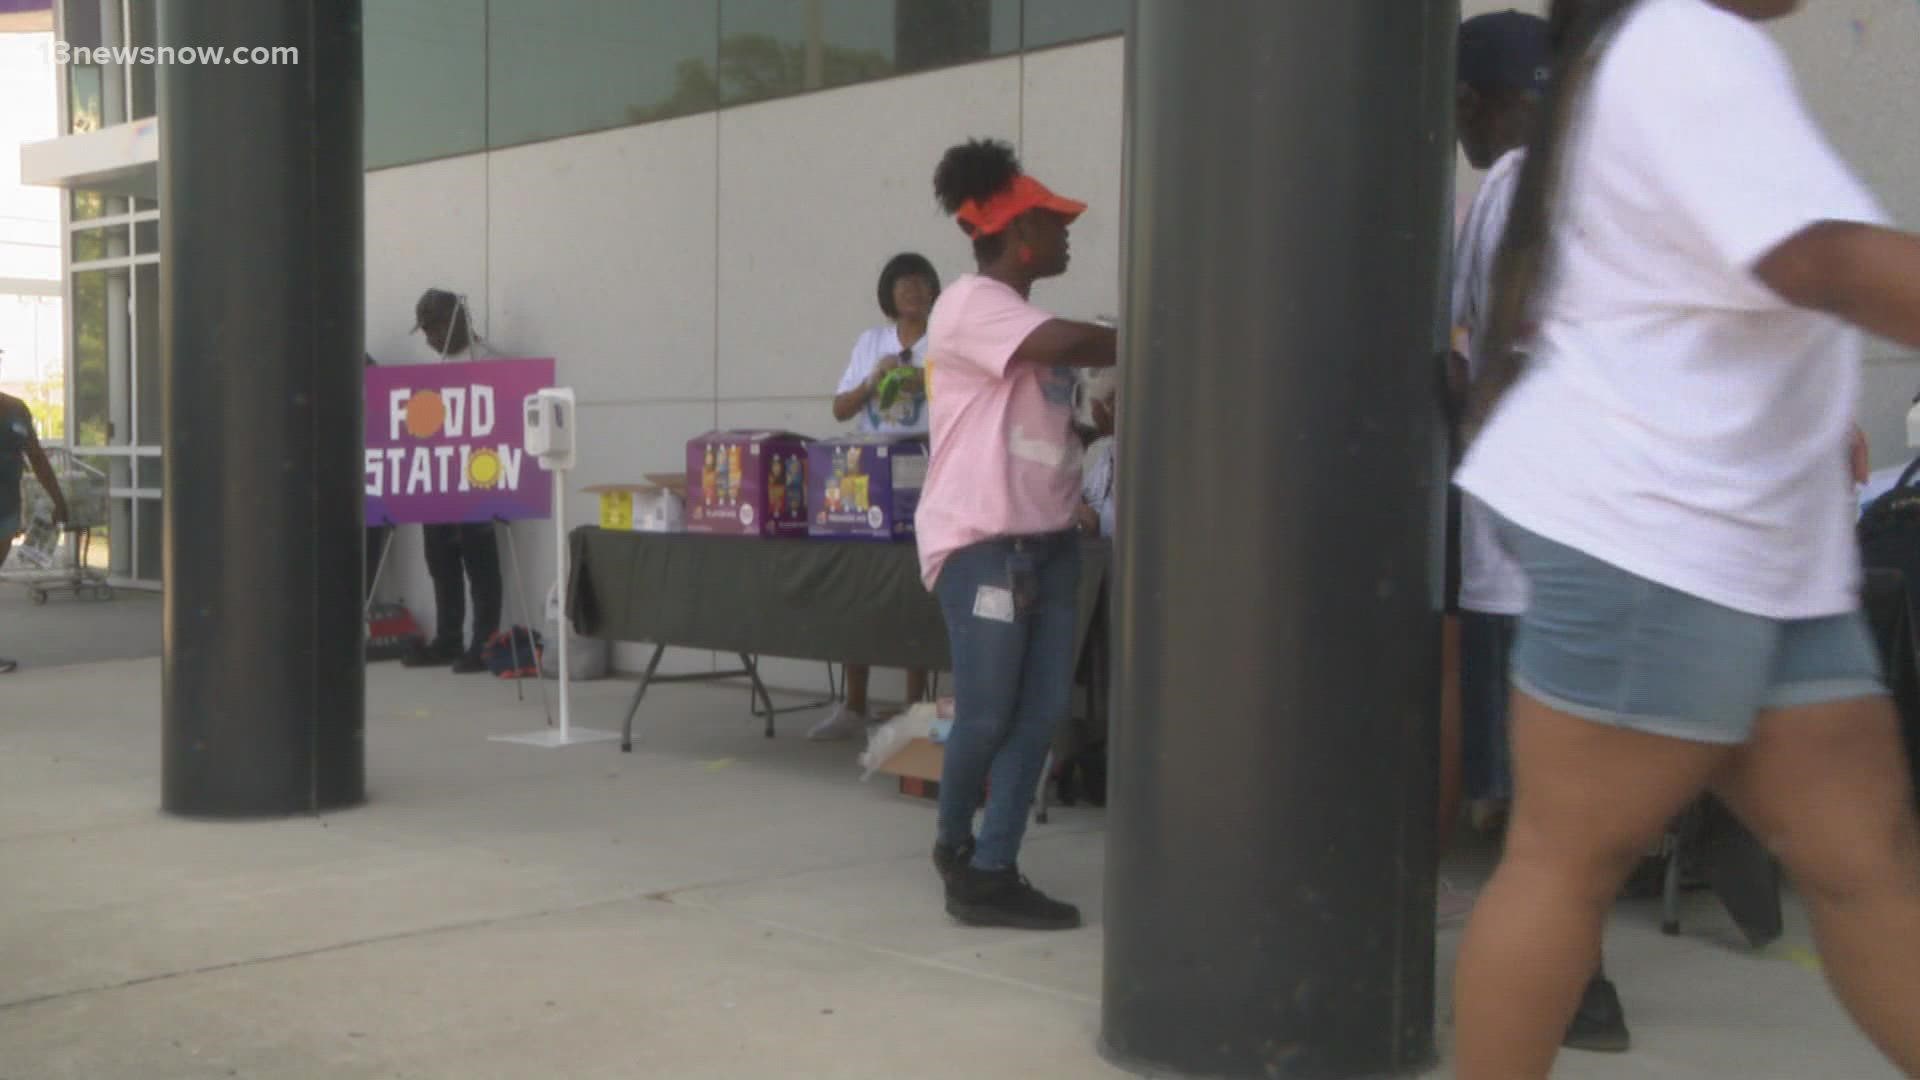 A Norfolk church hosted an event Saturday to offer free resources to the homeless and displaced community.